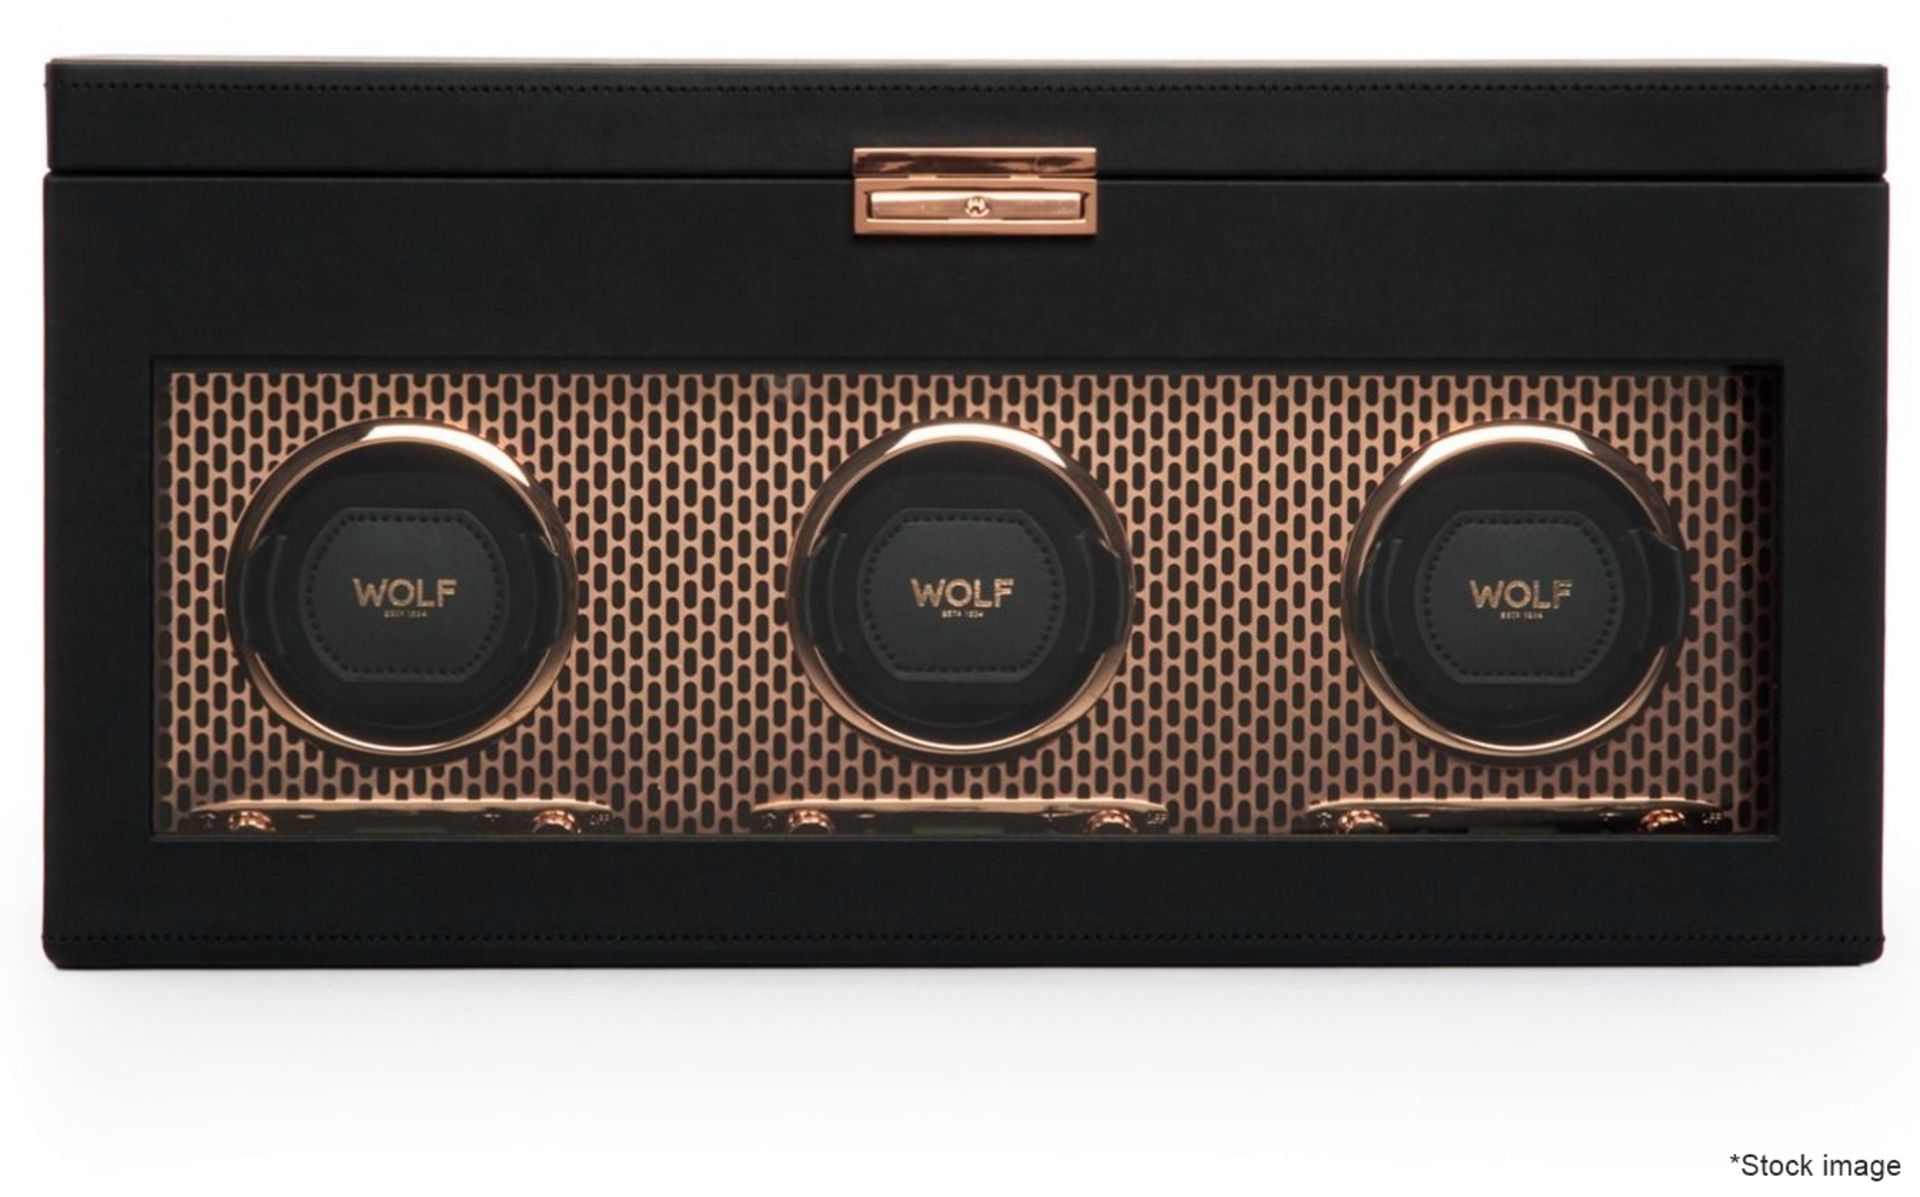 1 x WOLF 'Axis' Luxury Triple Watch Winder With Storage - Original Price £1,809 - Unused Boxed Stock - Image 21 of 32